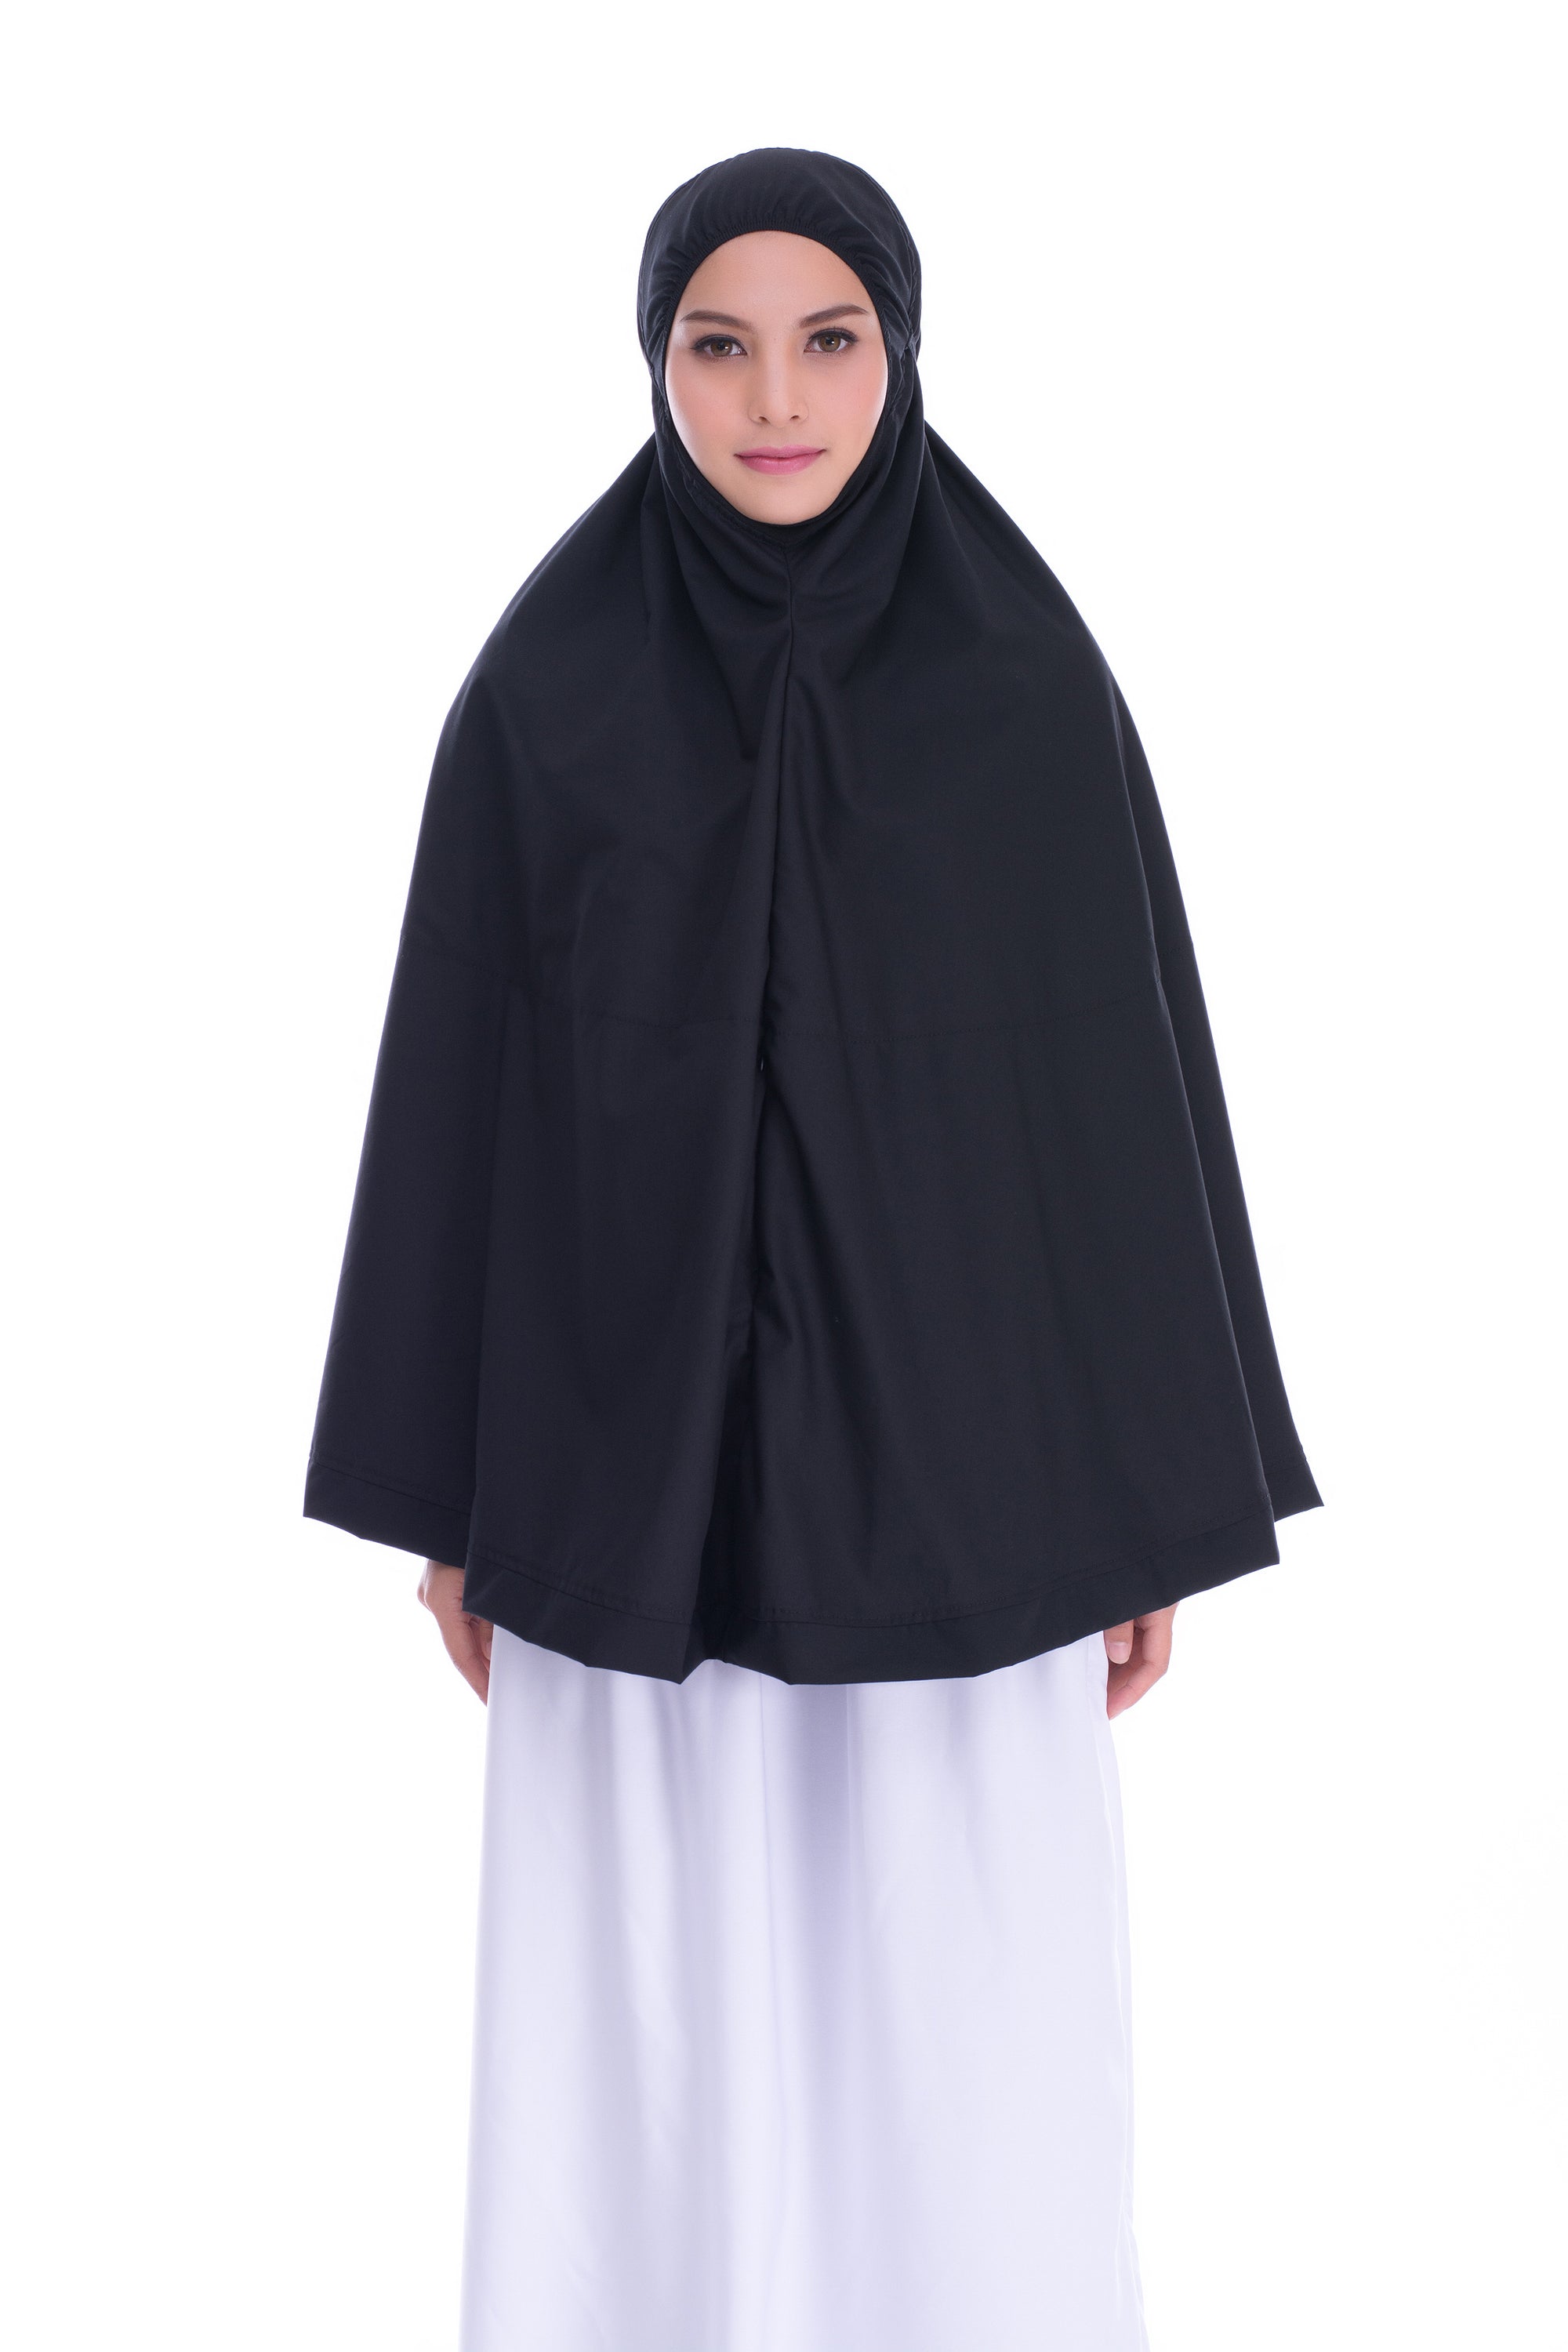 Telekung Mini with Pocket is made for those performing umrah or hajj.